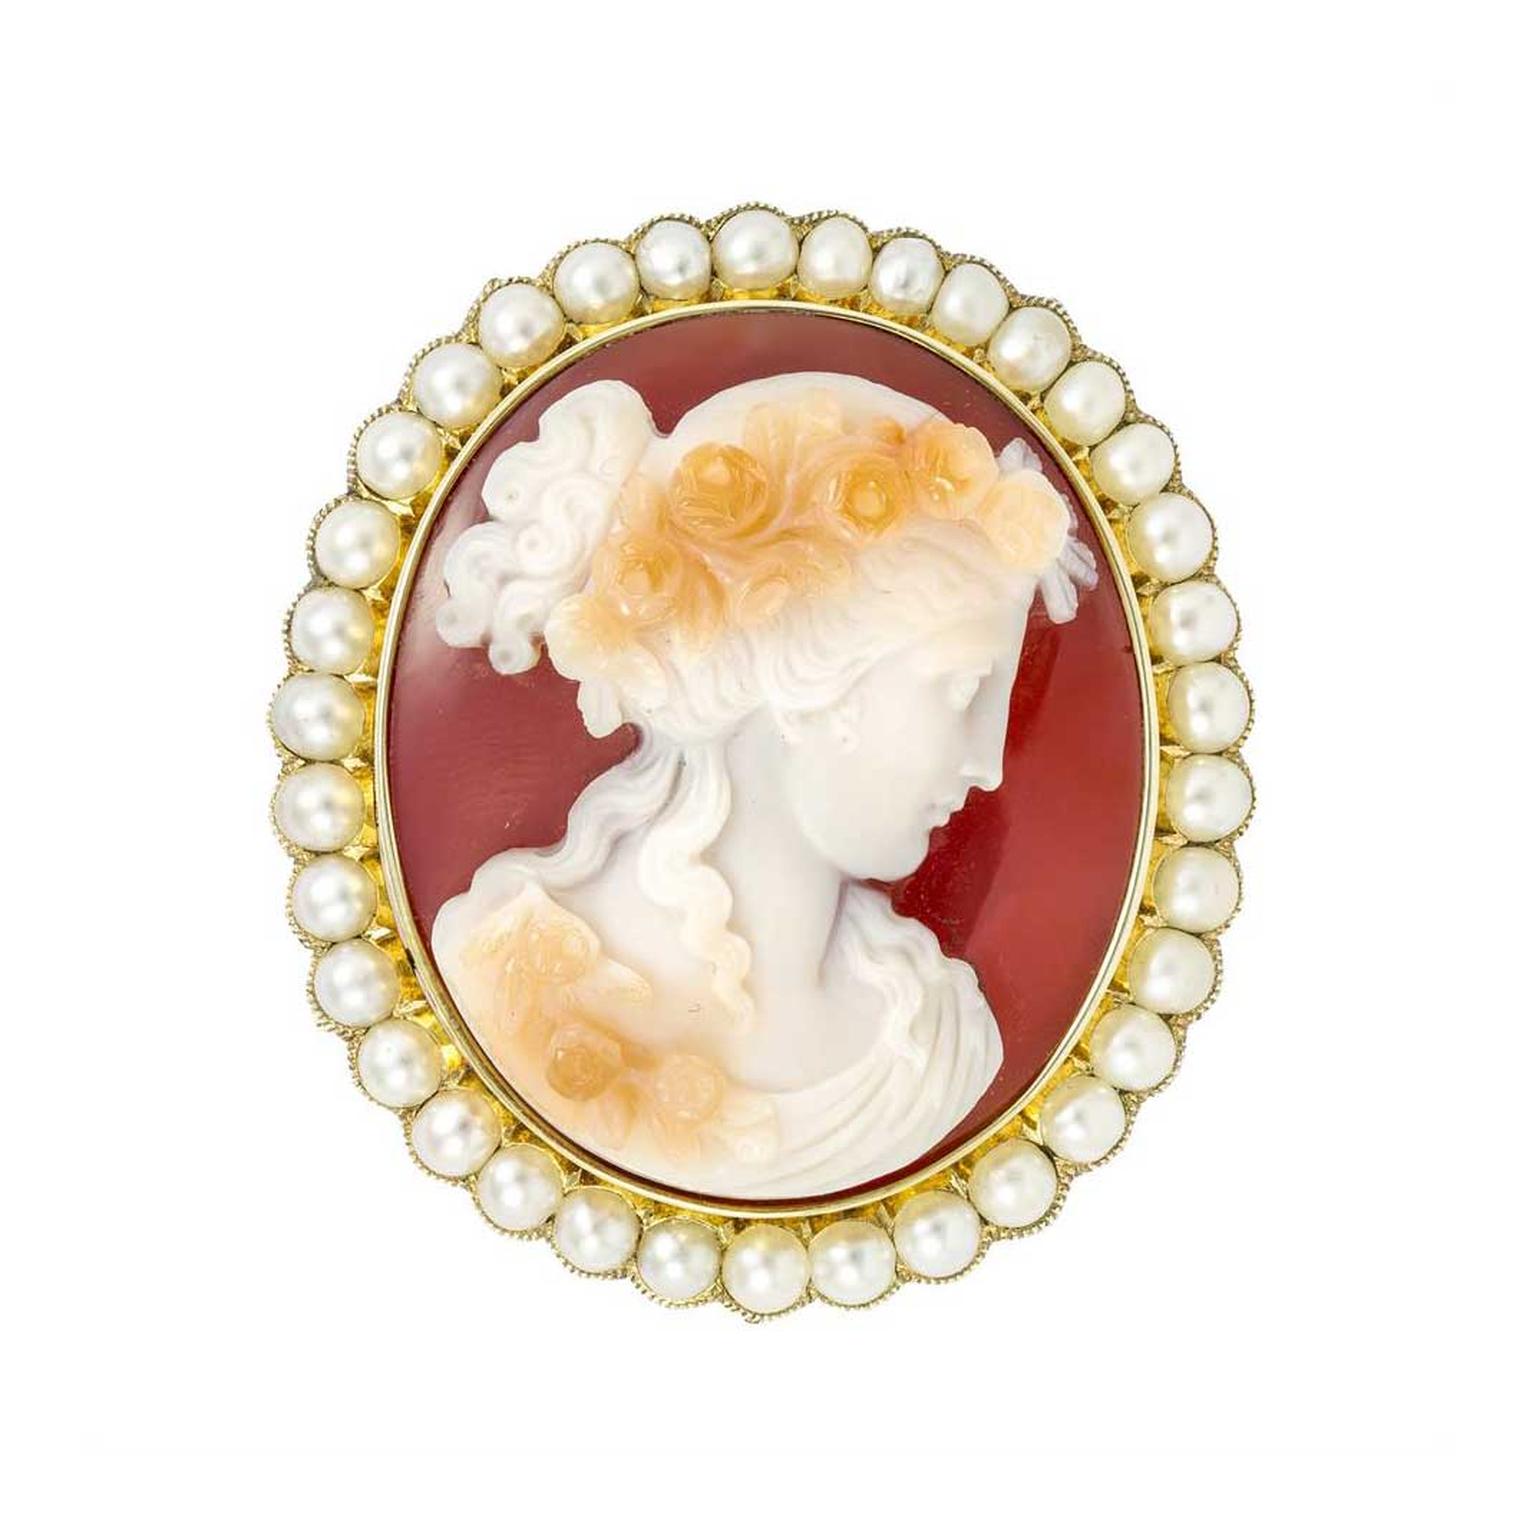 Glimpses of Elegance: Exploring the Allure of 19th Century Brooches